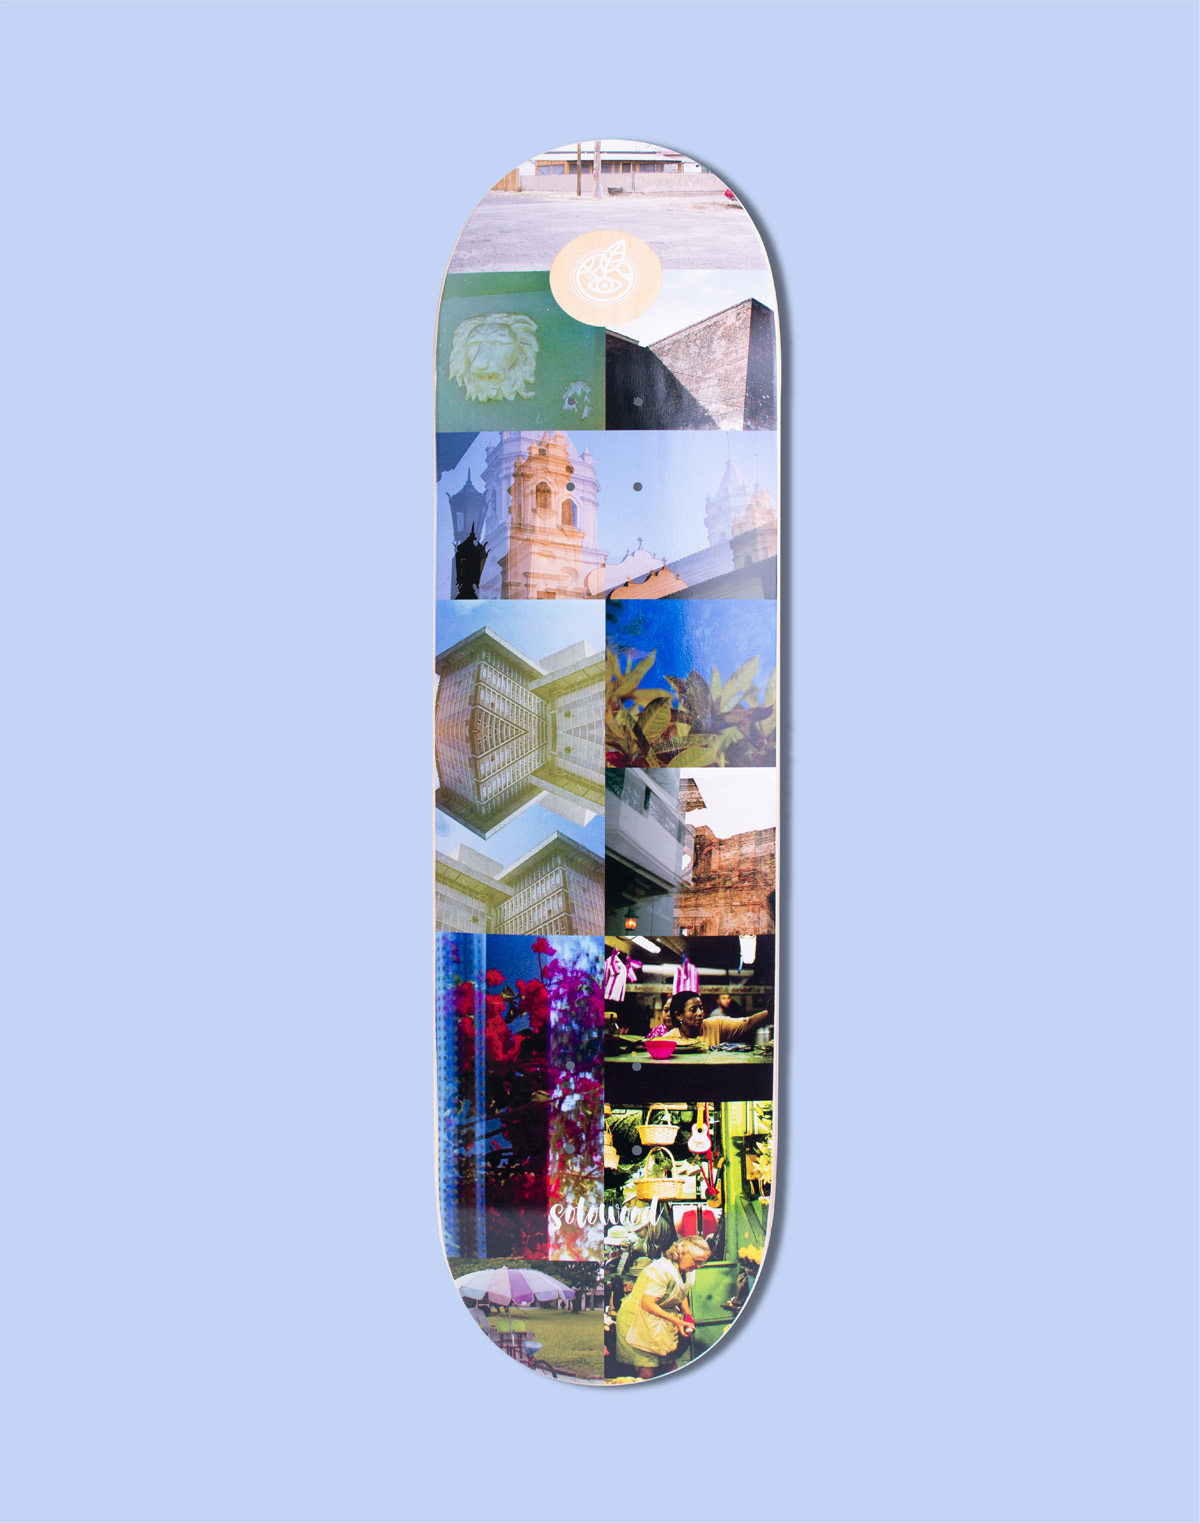 Collage Photo Series By Solowood Skateboards 5